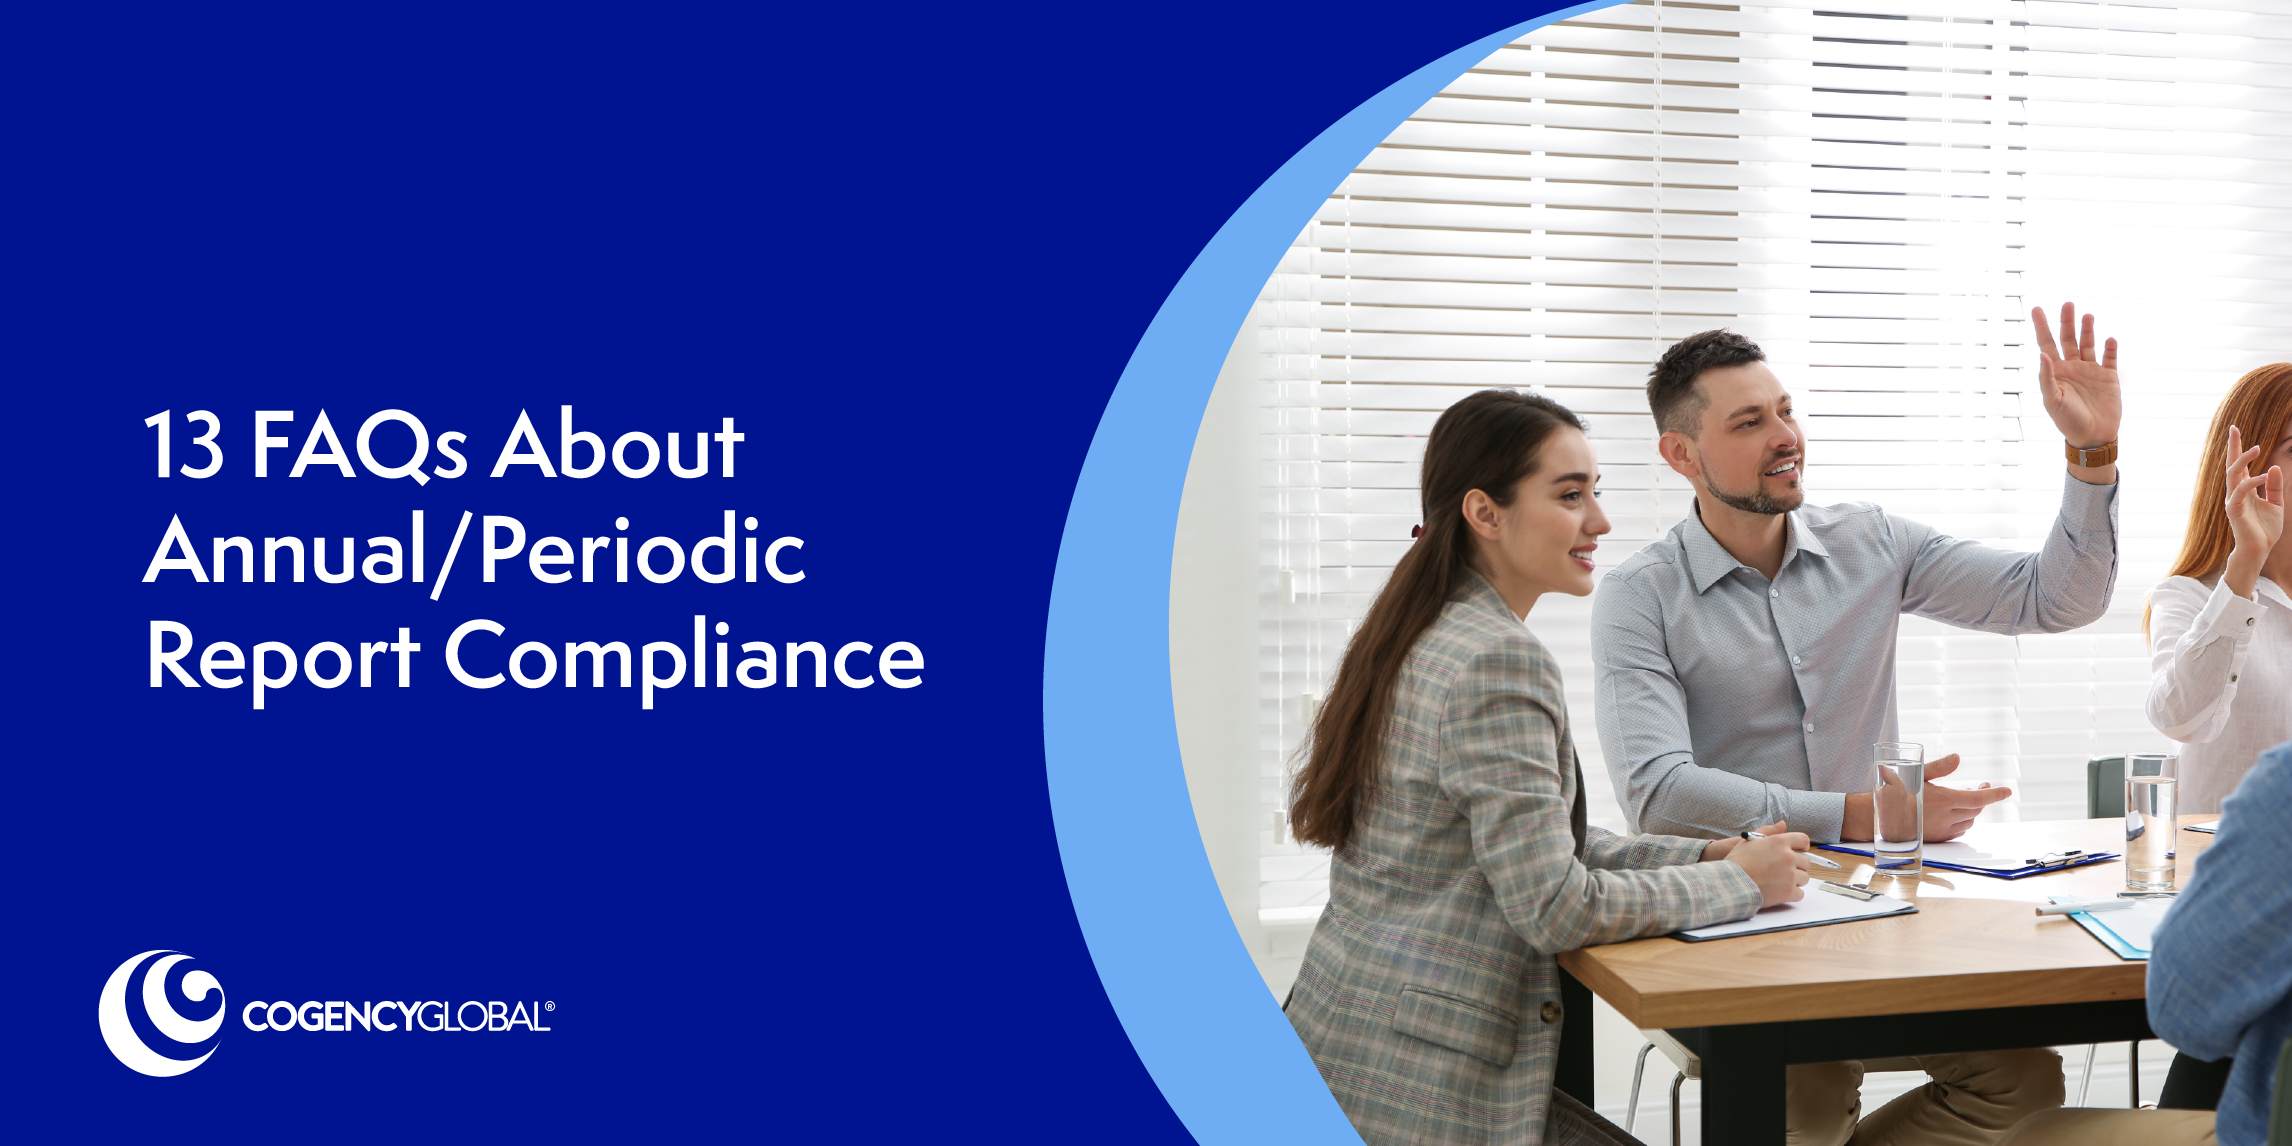 13 Frequently Asked Questions About Annual/Periodic Report Compliance